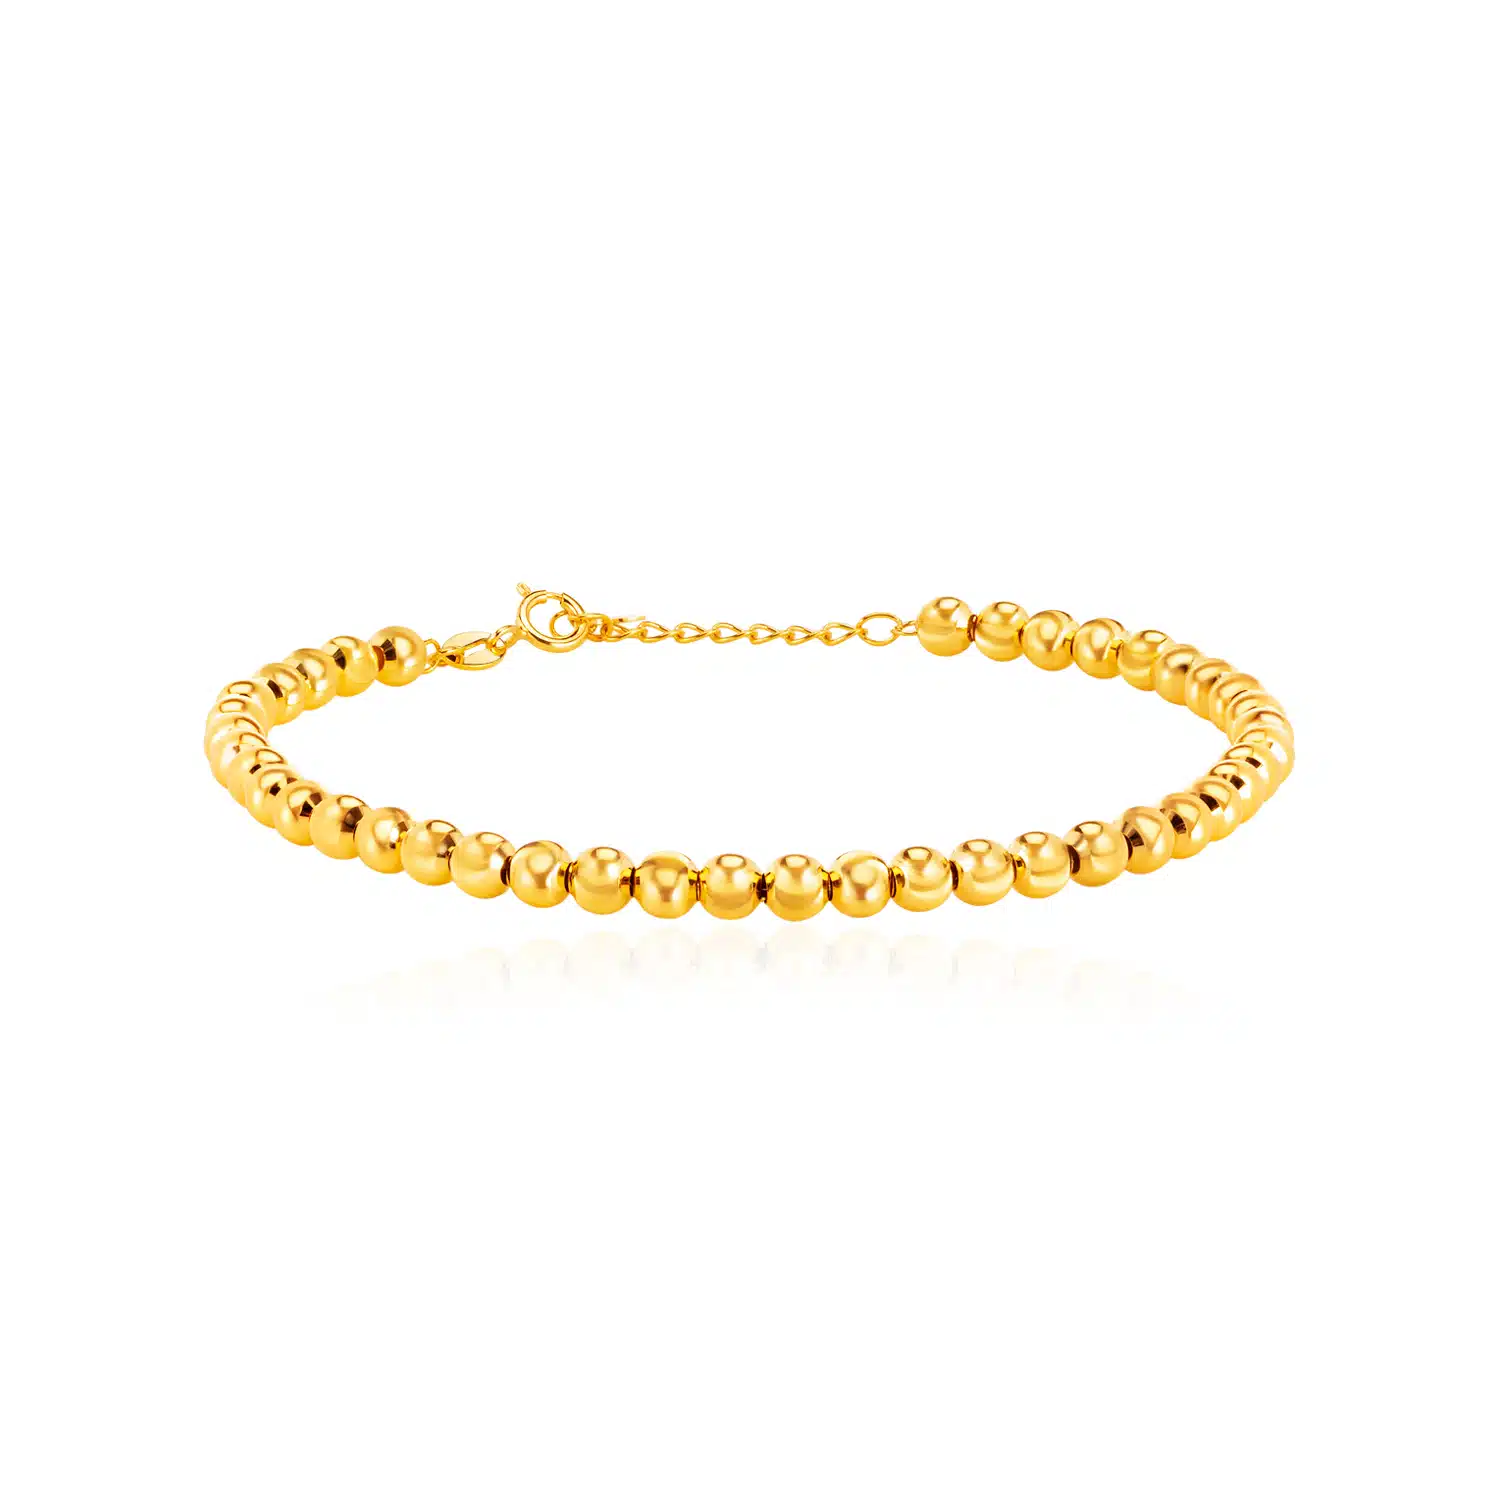 Buy JHB GOLD PLATED ATTRACTIVE FASHION JEWELLERY BEADS BRACELETS FOR  WOMEN'S AND GIRL'S at Amazon.in